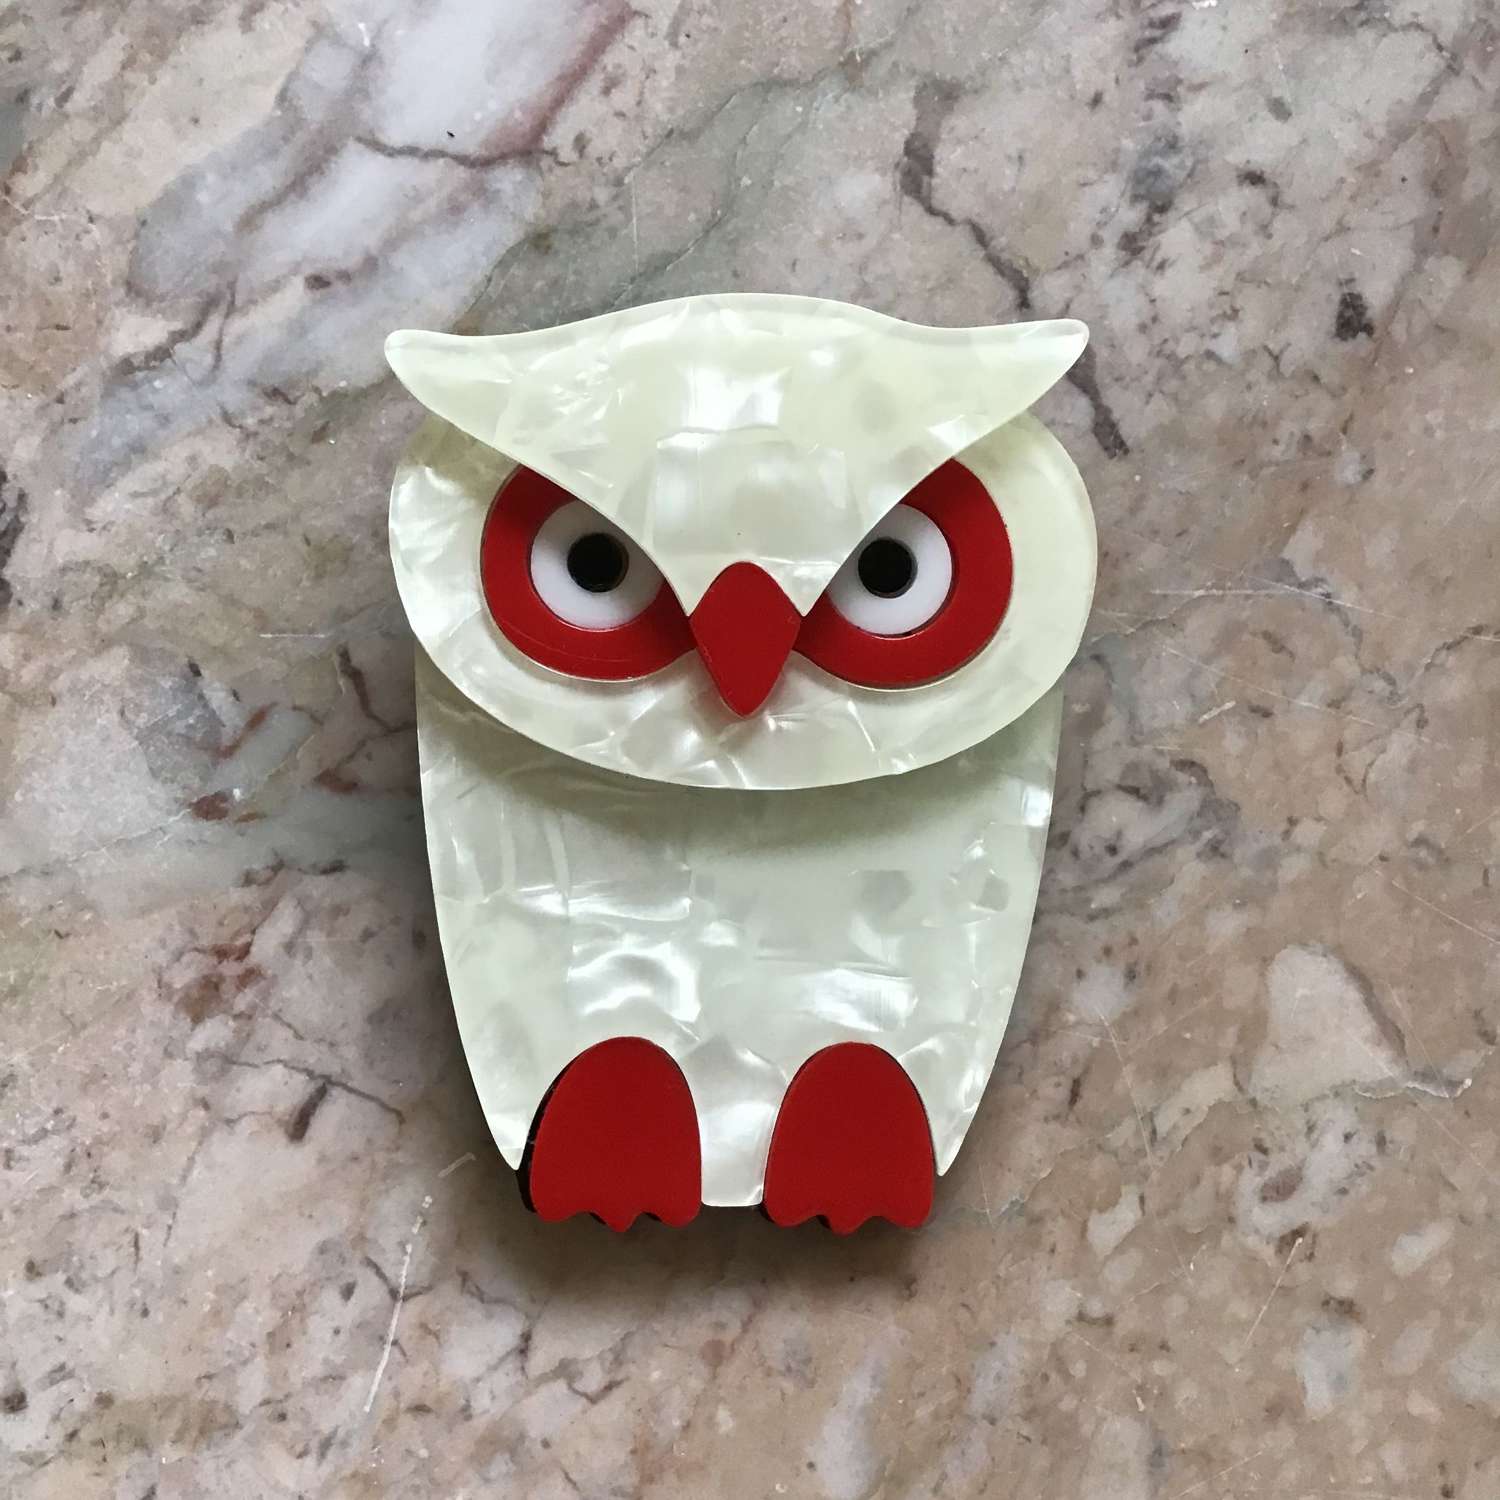 Lea Stein style cream and red owl brooch